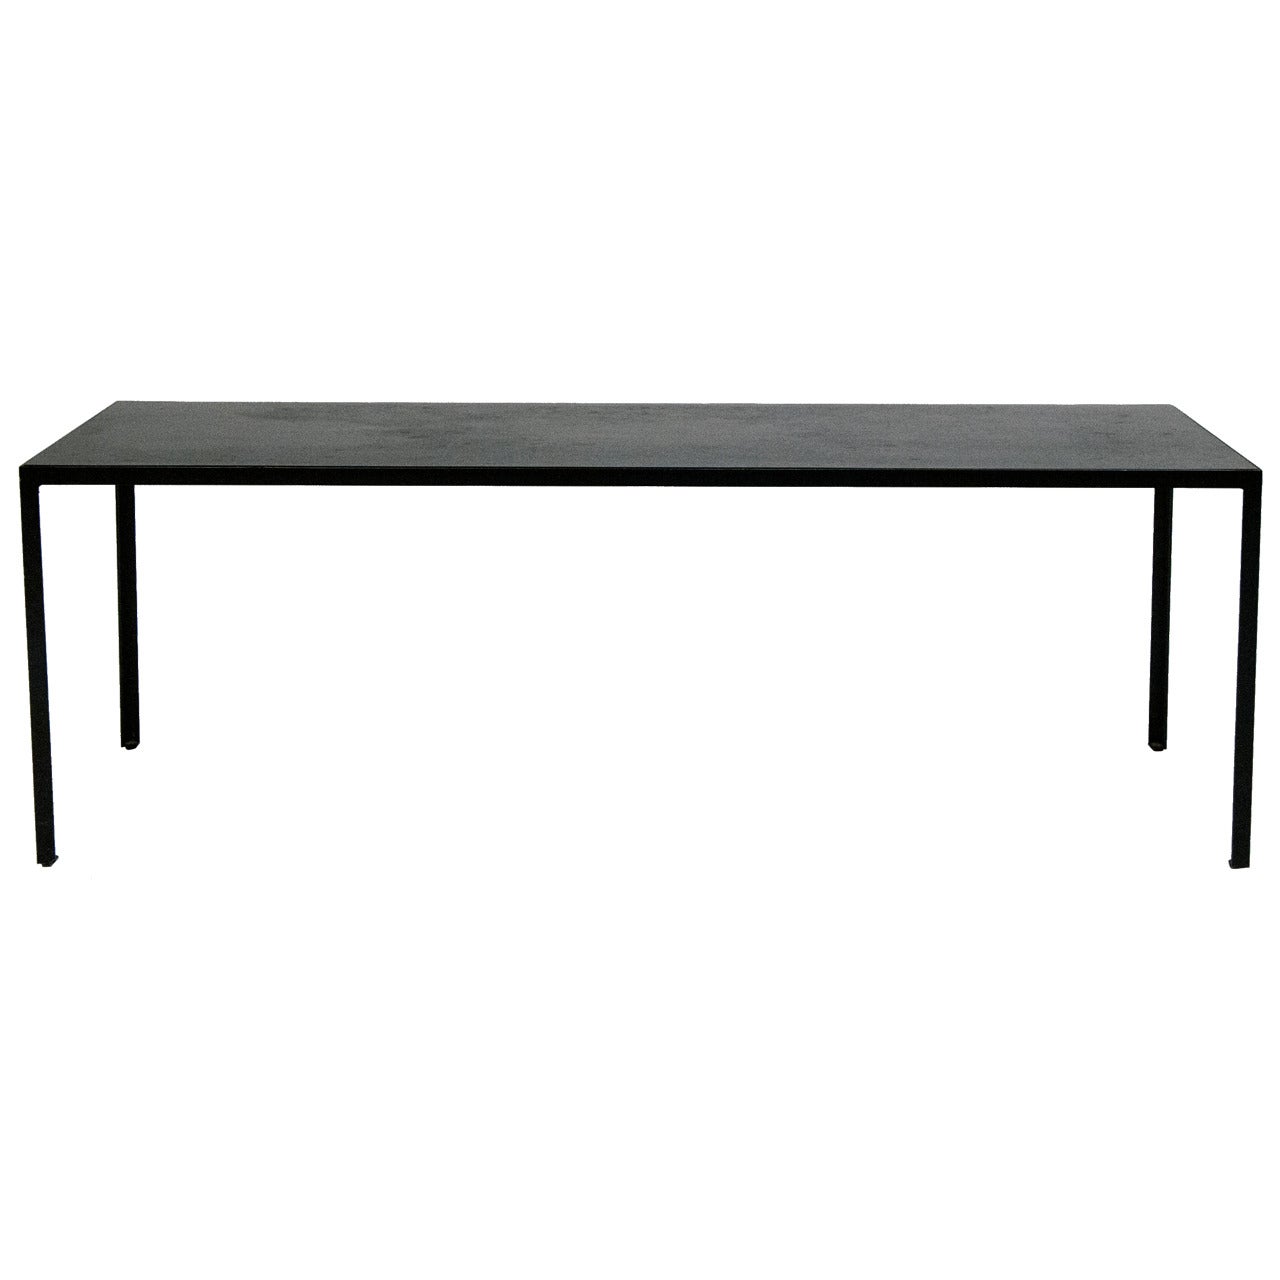 George Nelson Steelframe Table or Bench for Herman Miller